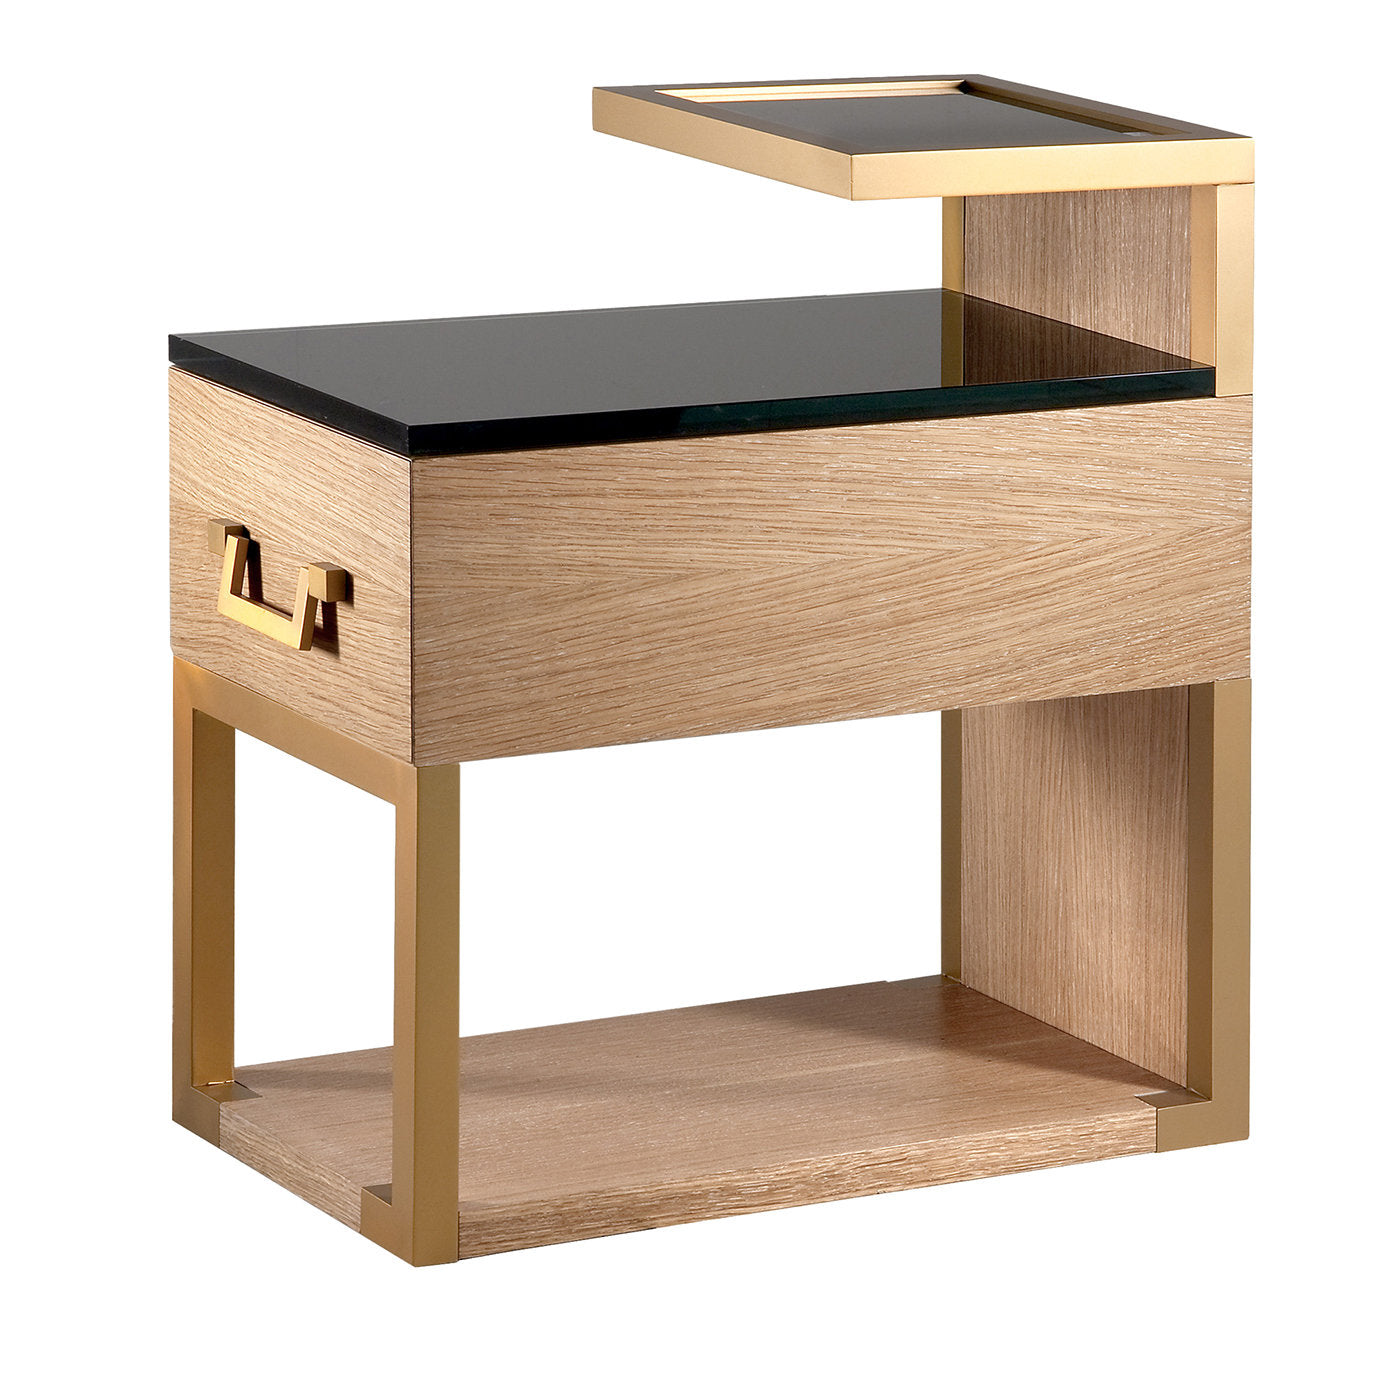 Durmast Bedside Table with Black Glass Top by Michele Bonan - Main view